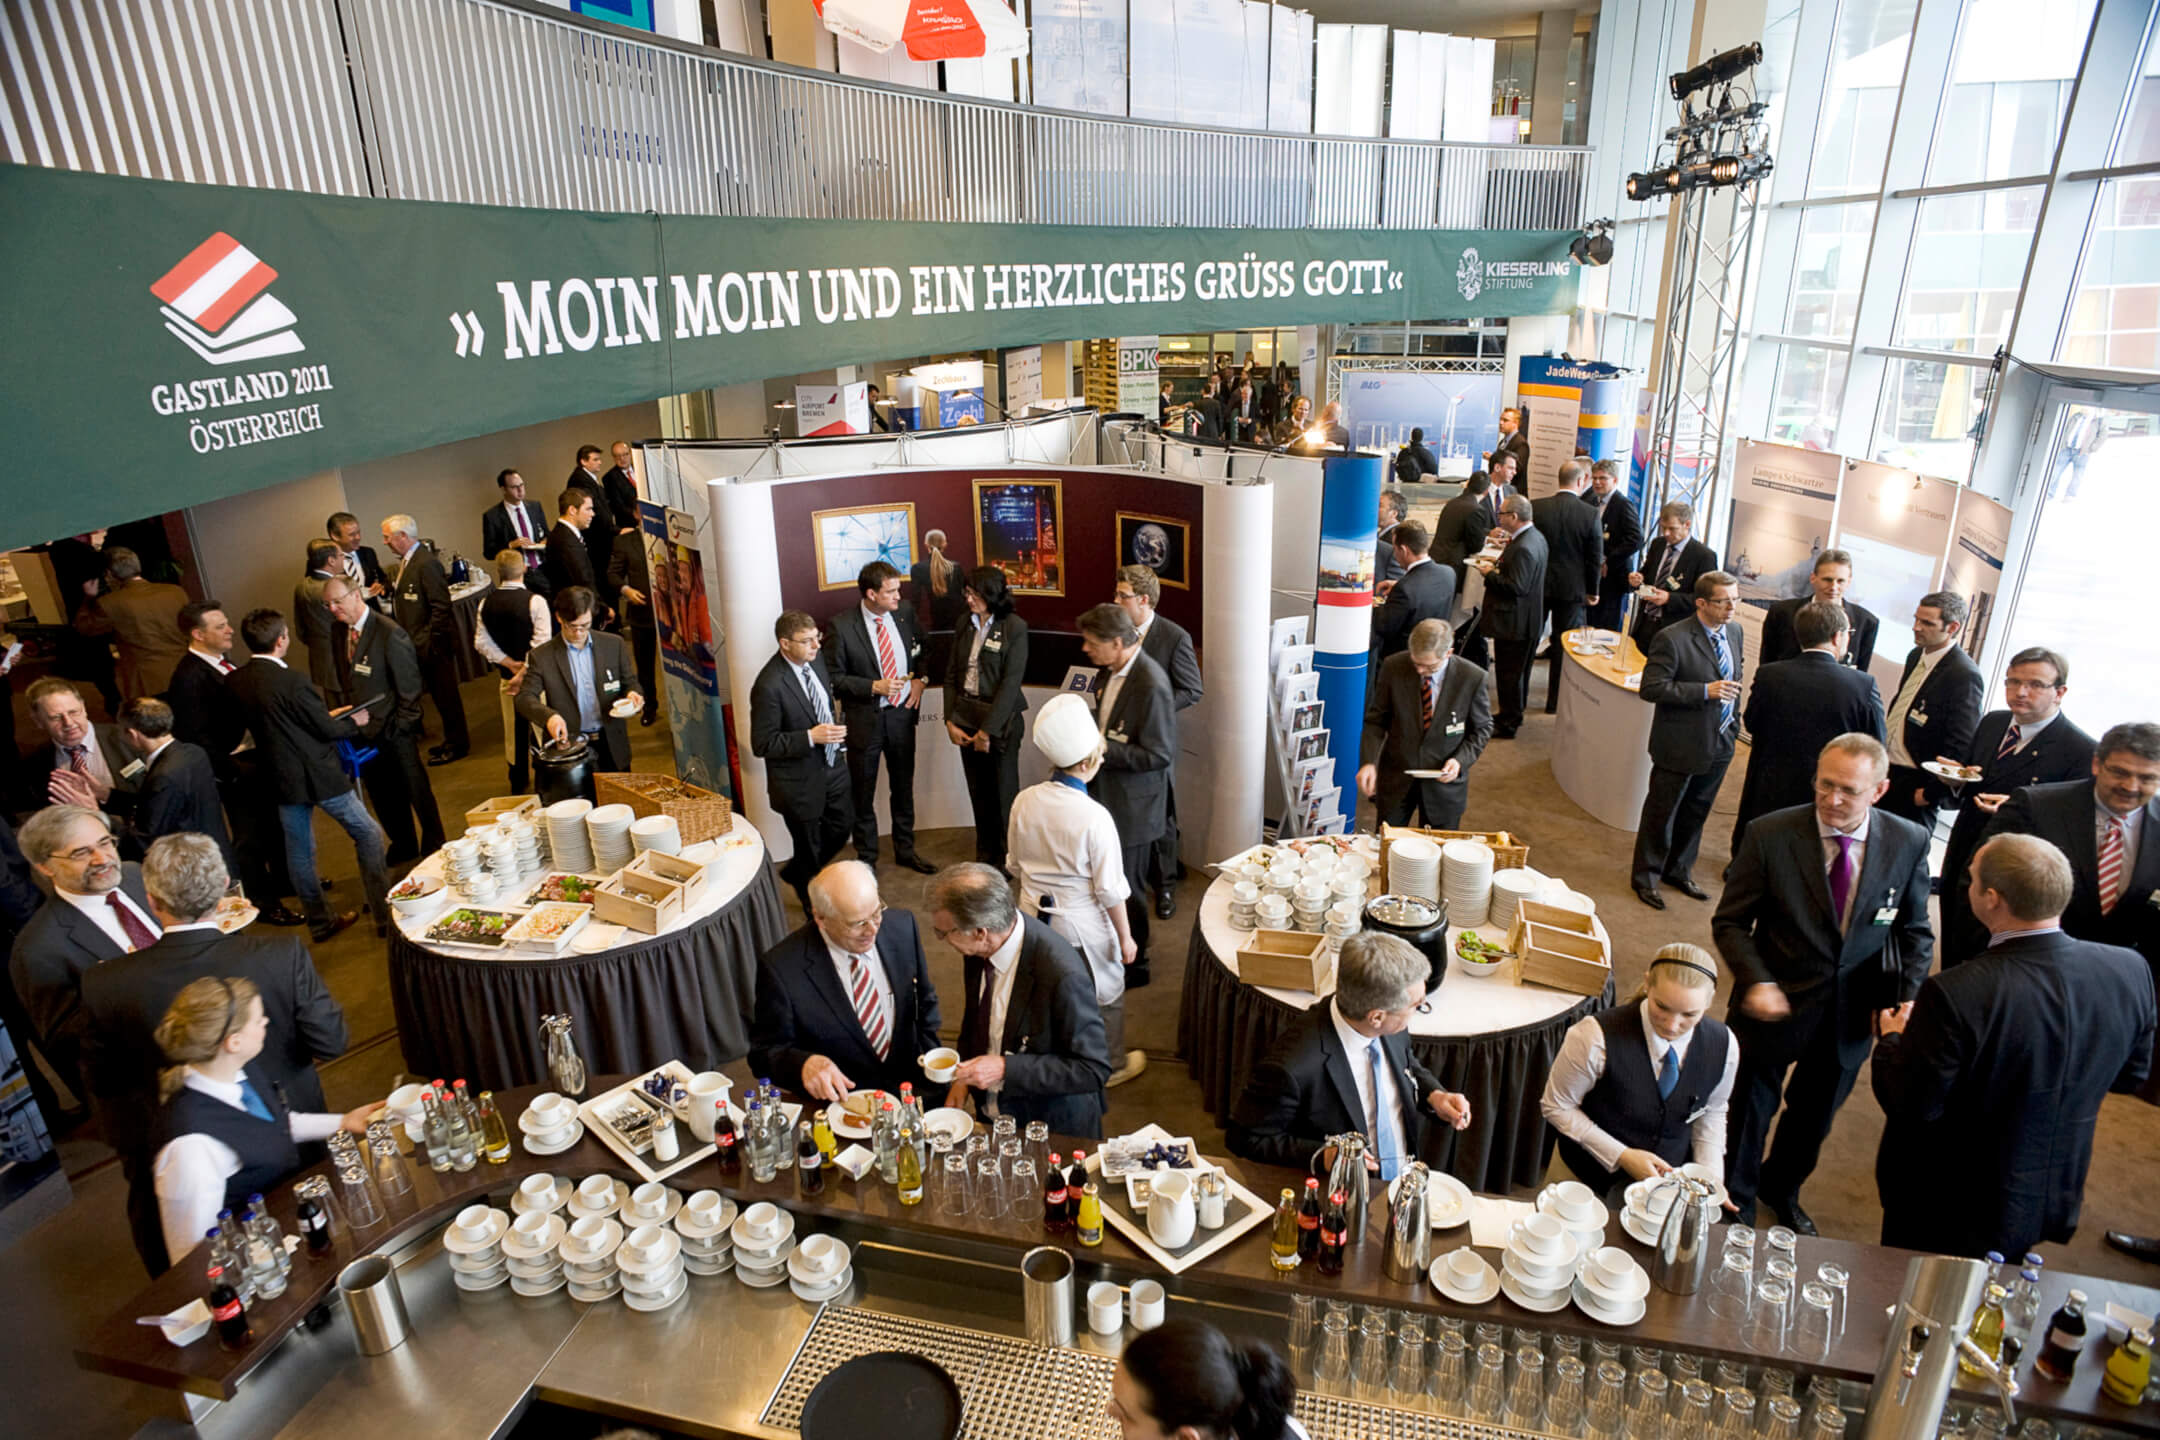 Empfang und Buffet im Conference Foyer